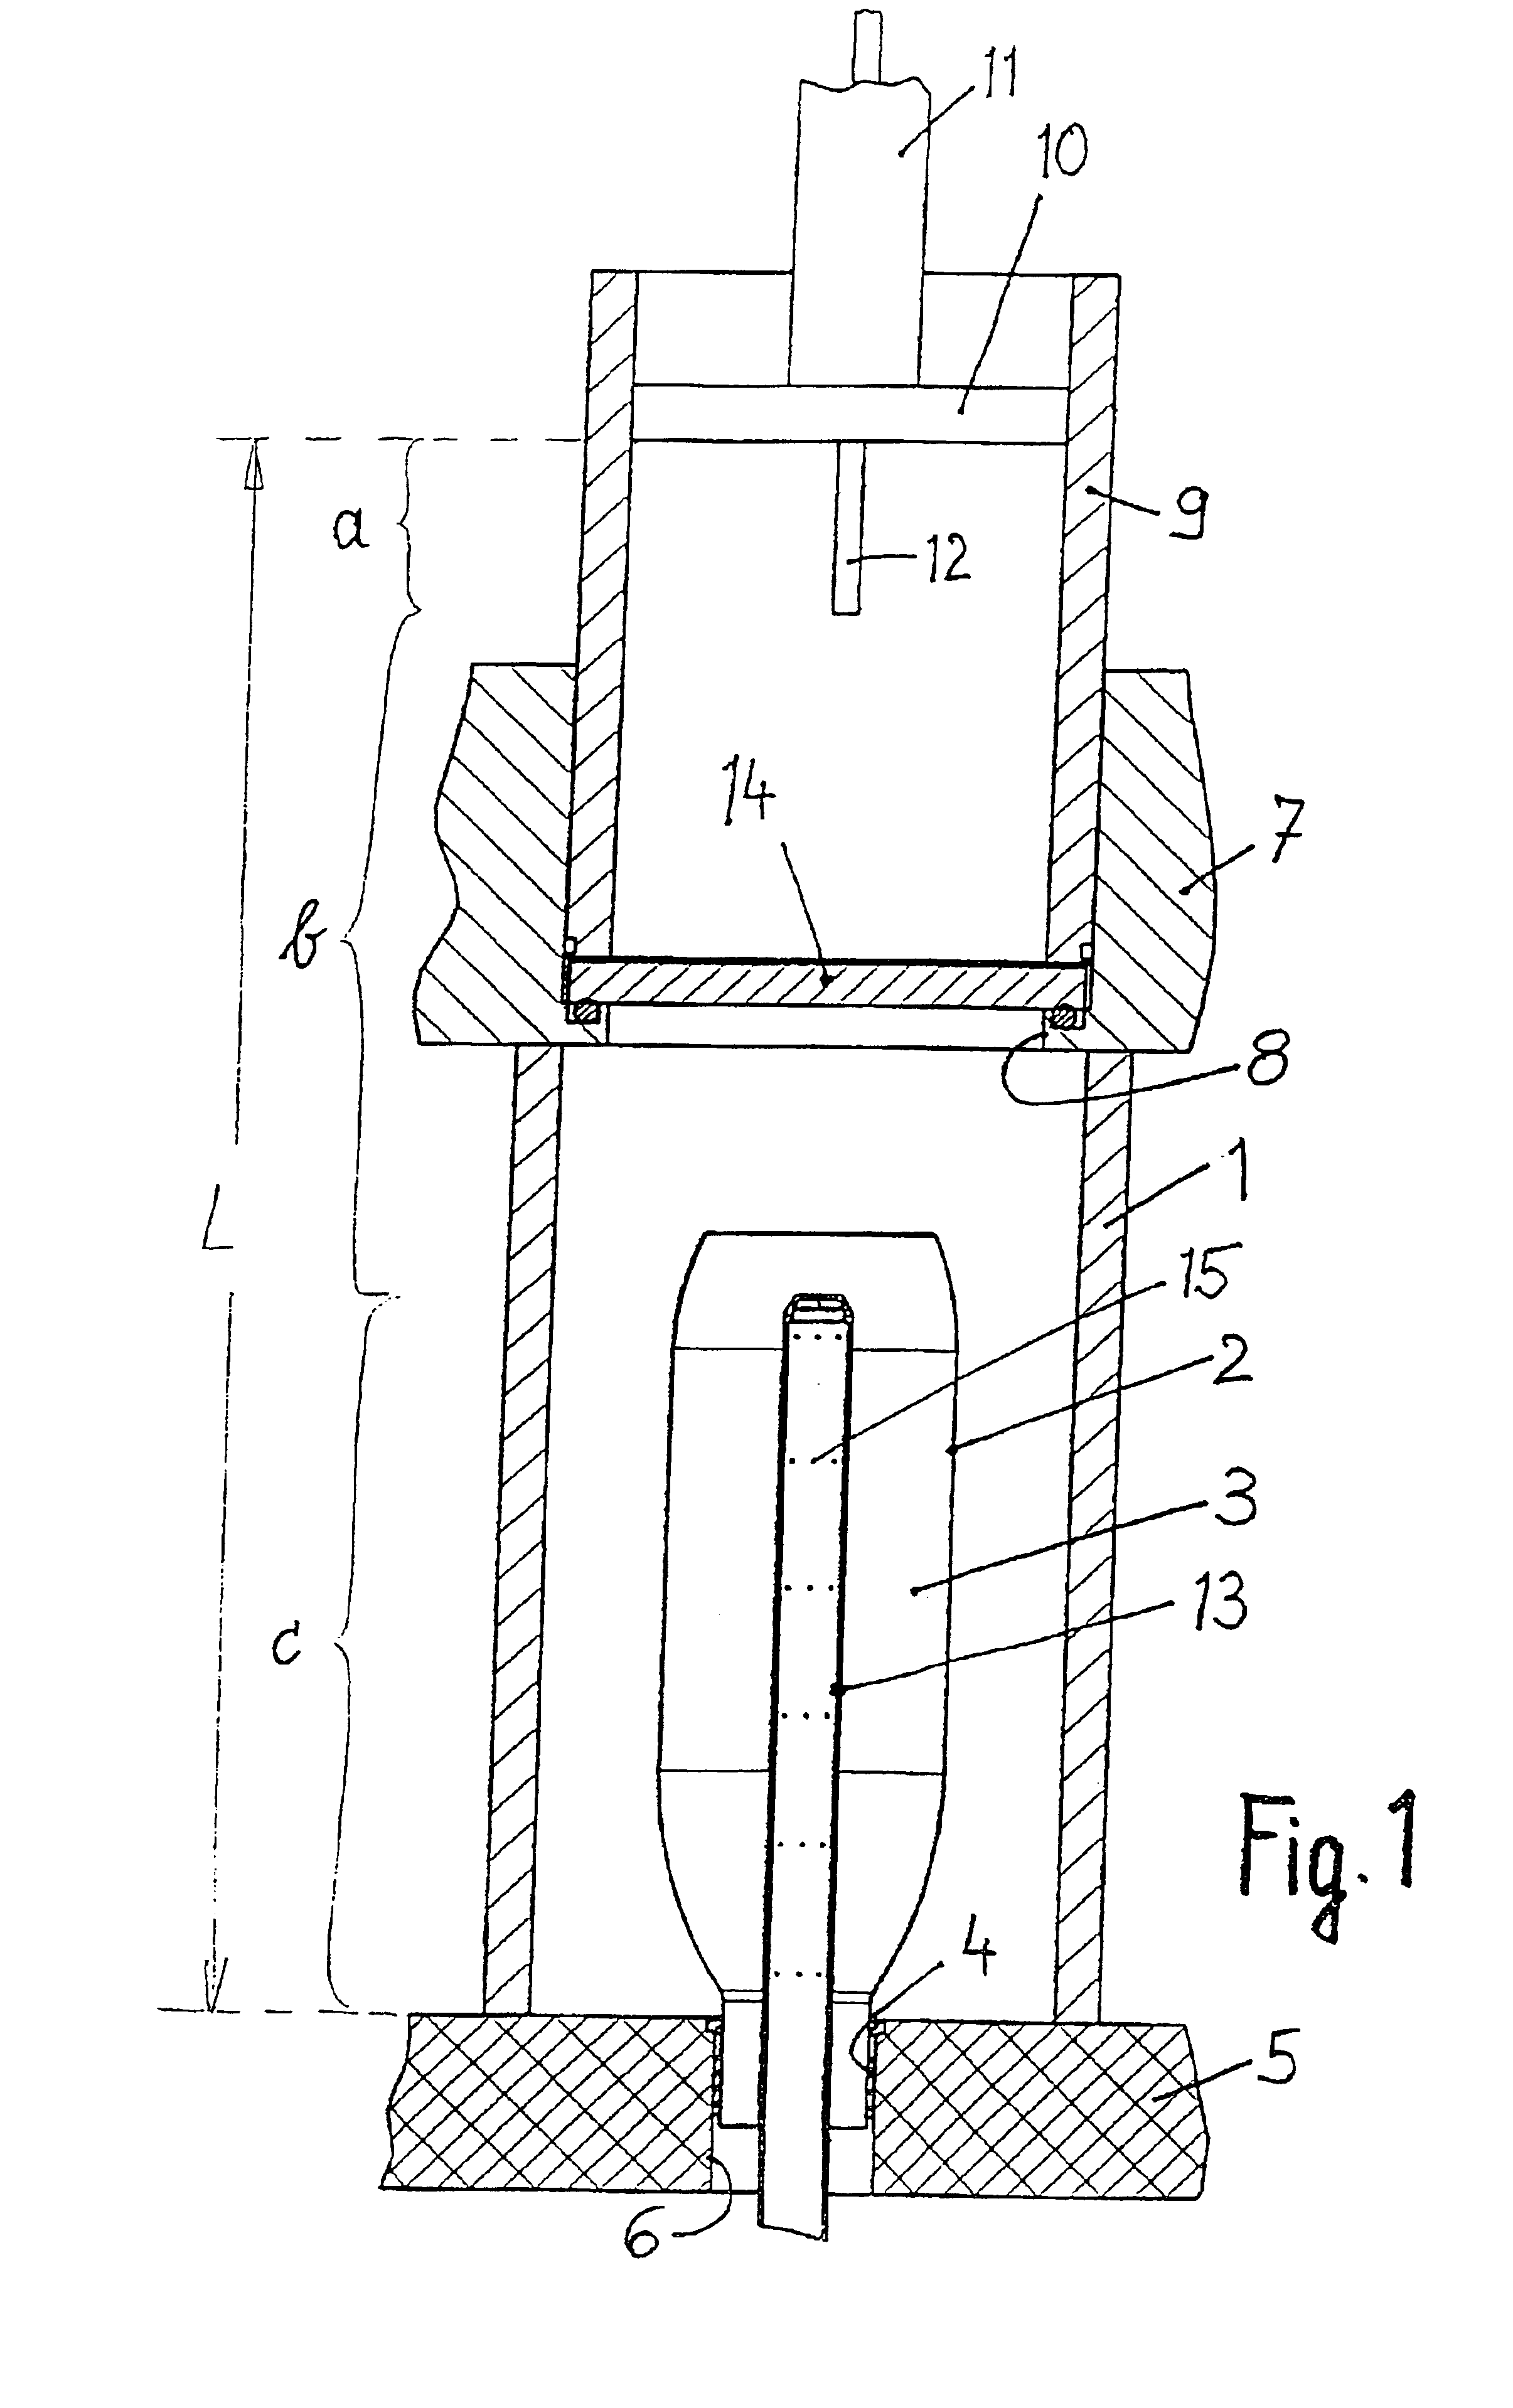 Arrangement for coupling microwave energy into a treatment chamber